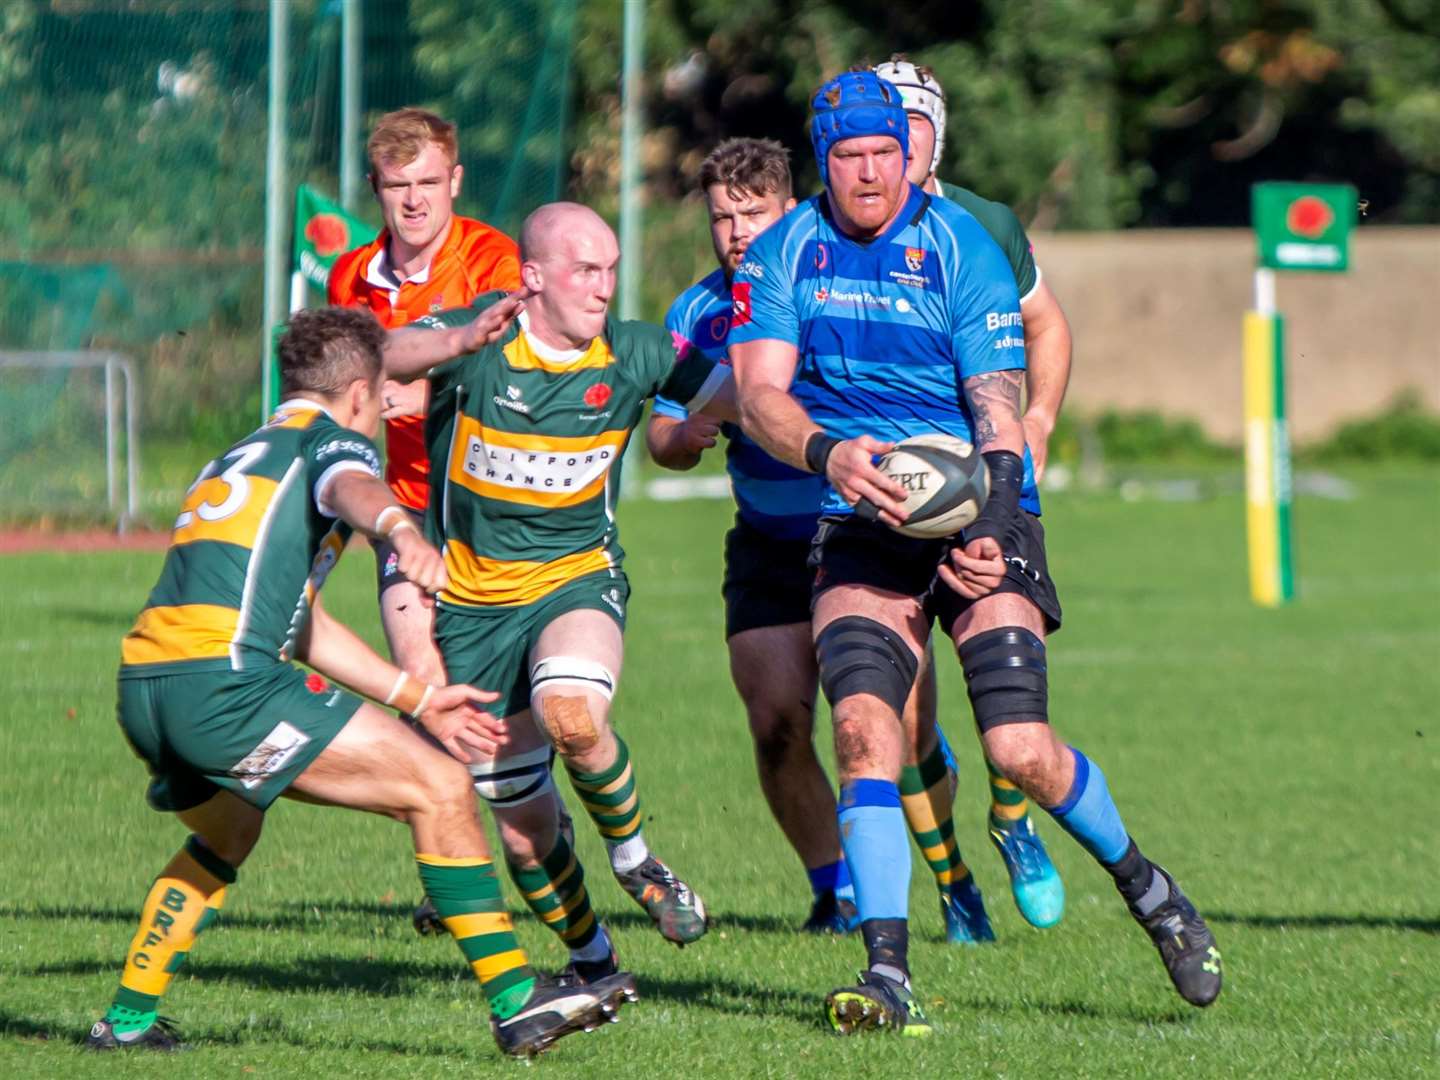 Dave Irvine – the Canterbury player tore his bicep in last month’s derby win at Tonbridge Juddians. Picture: Phillipa Hilton